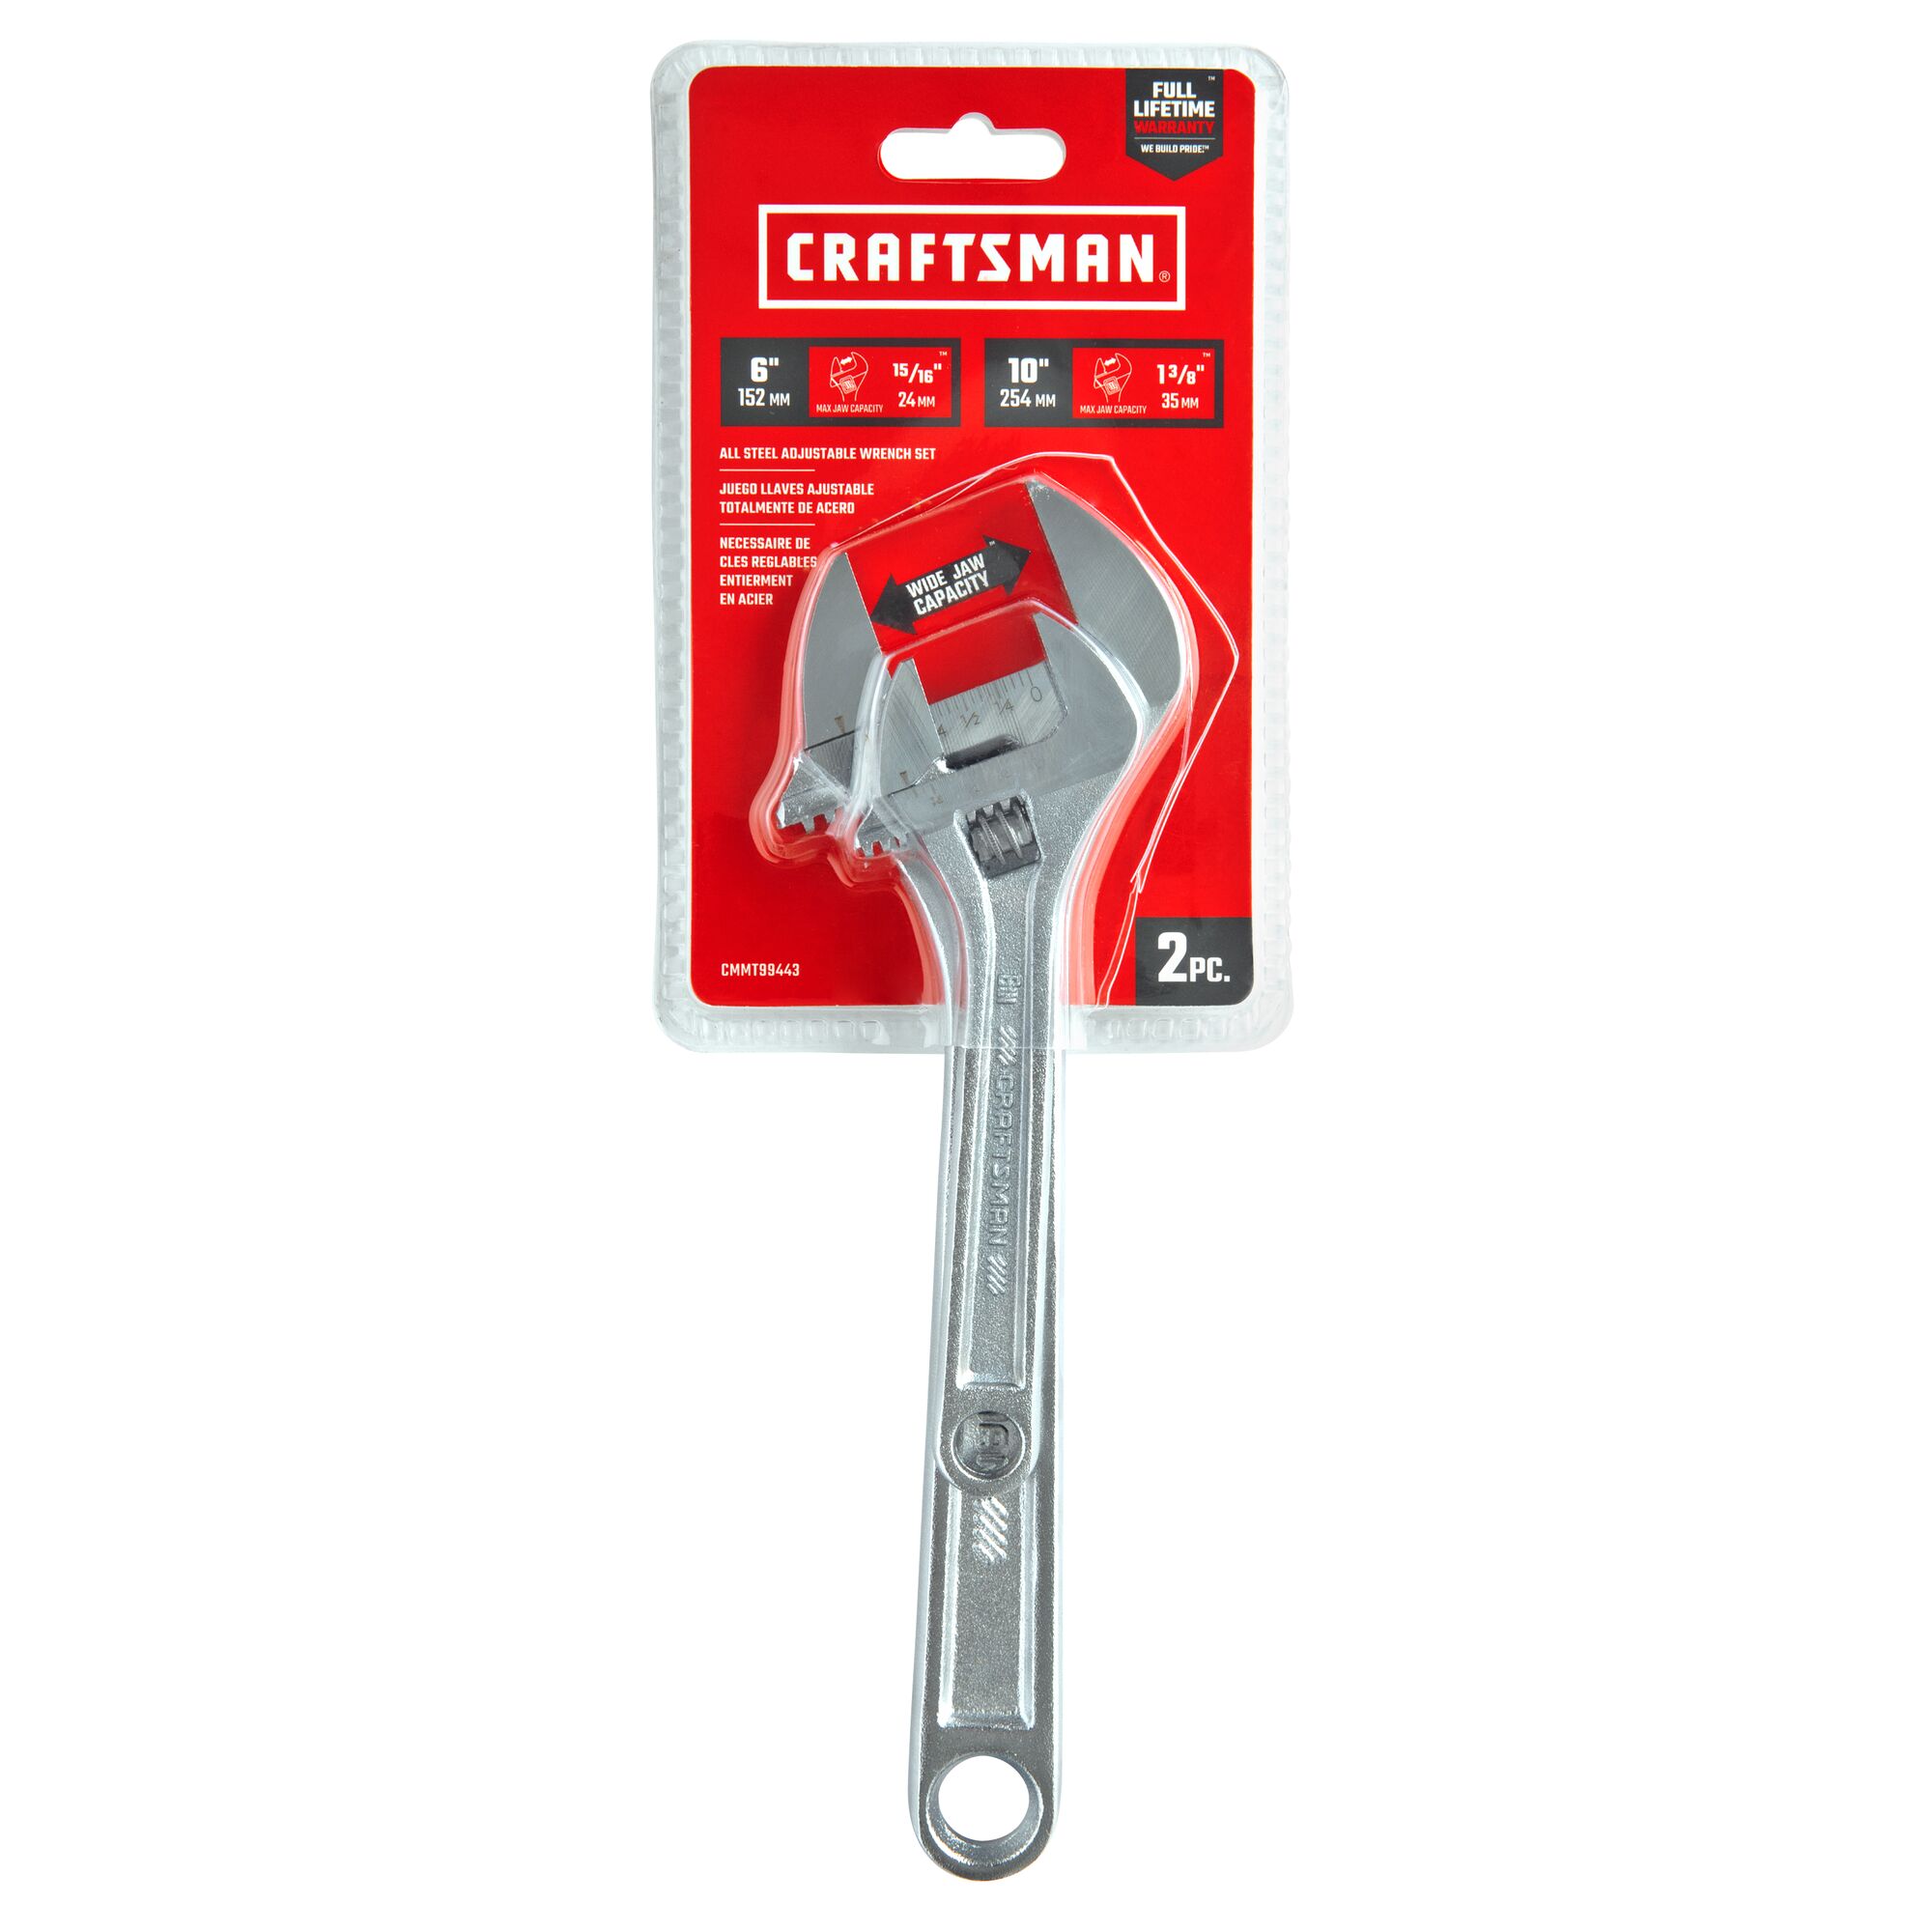 View of CRAFTSMAN Wrenches: Adjustable packaging